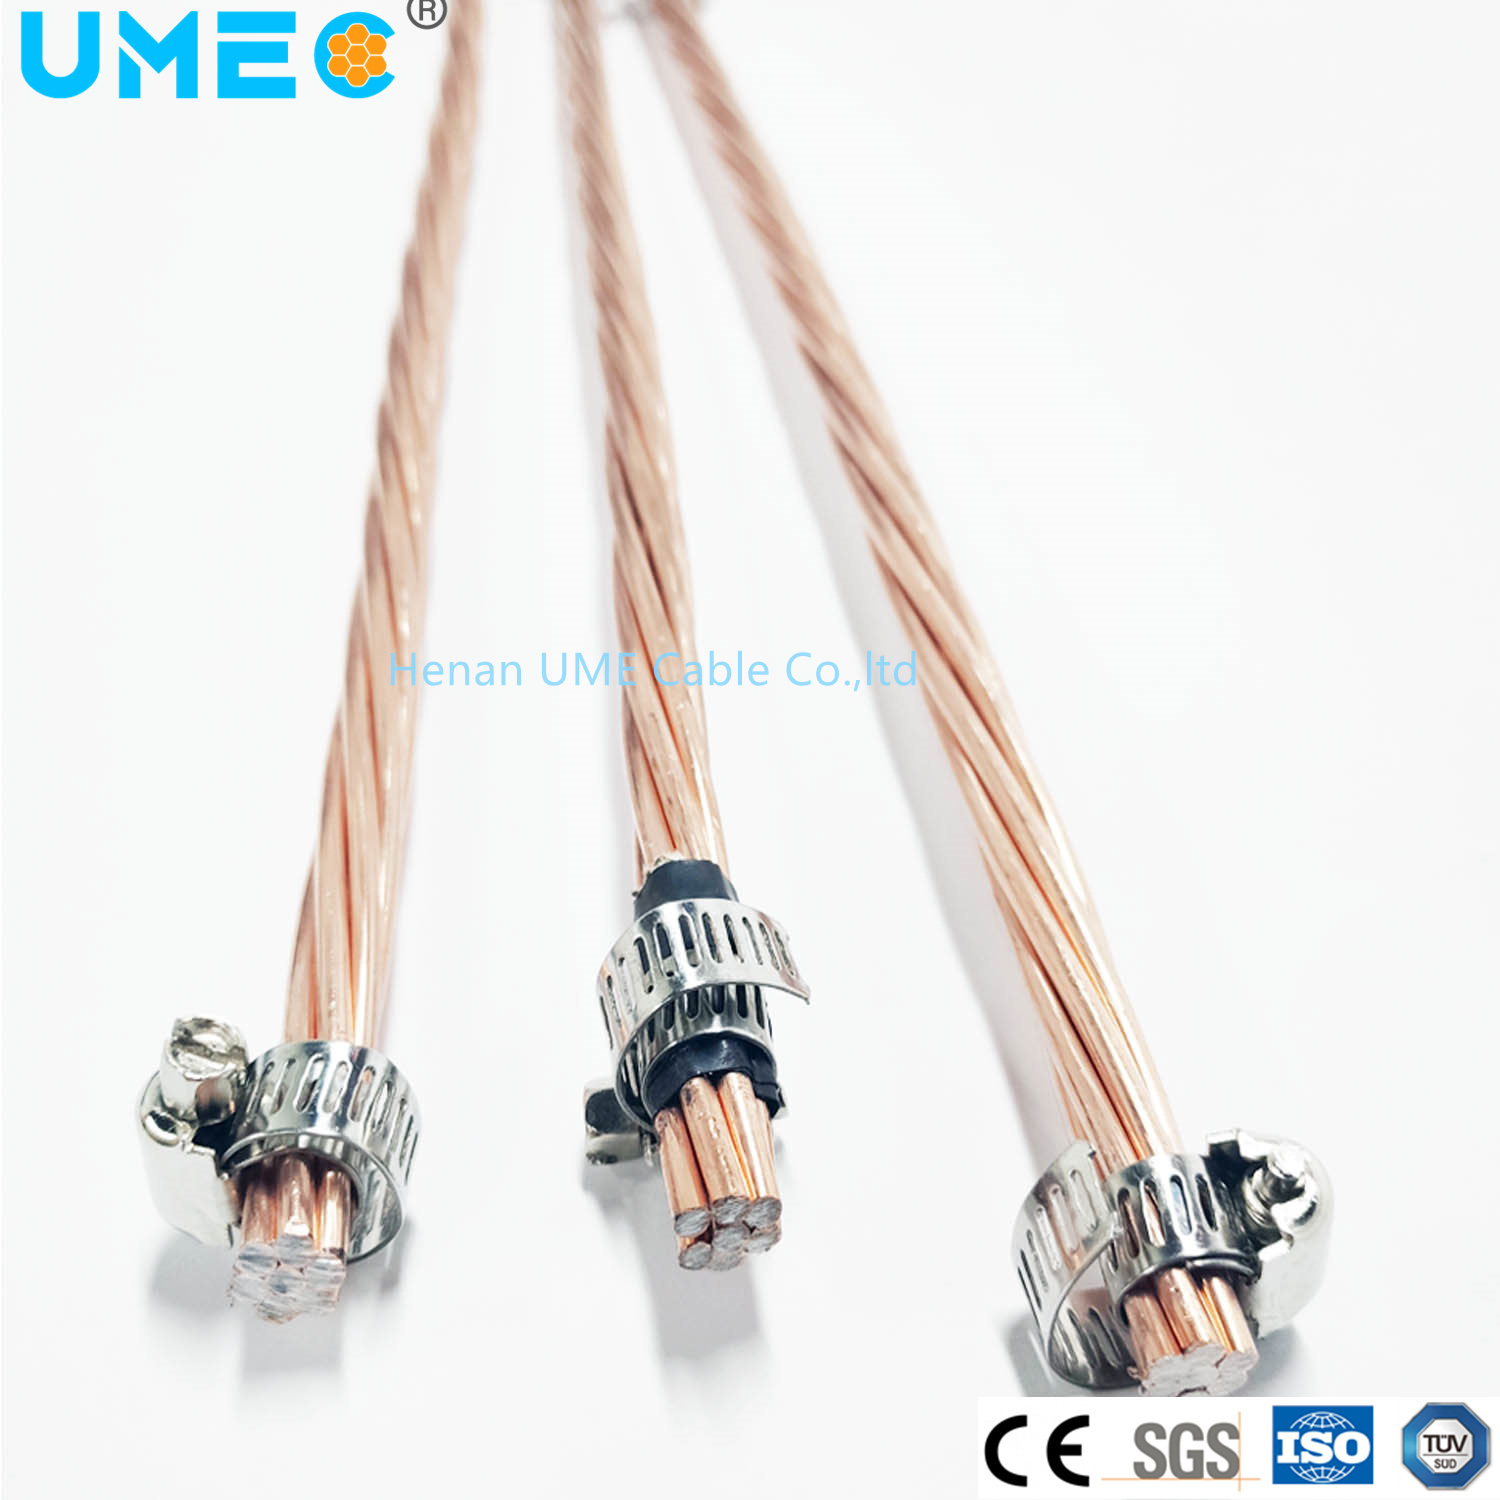 Steel Wires with Copper Coating 20%-40% Conductivity Copper Clad Steel Wire CCS